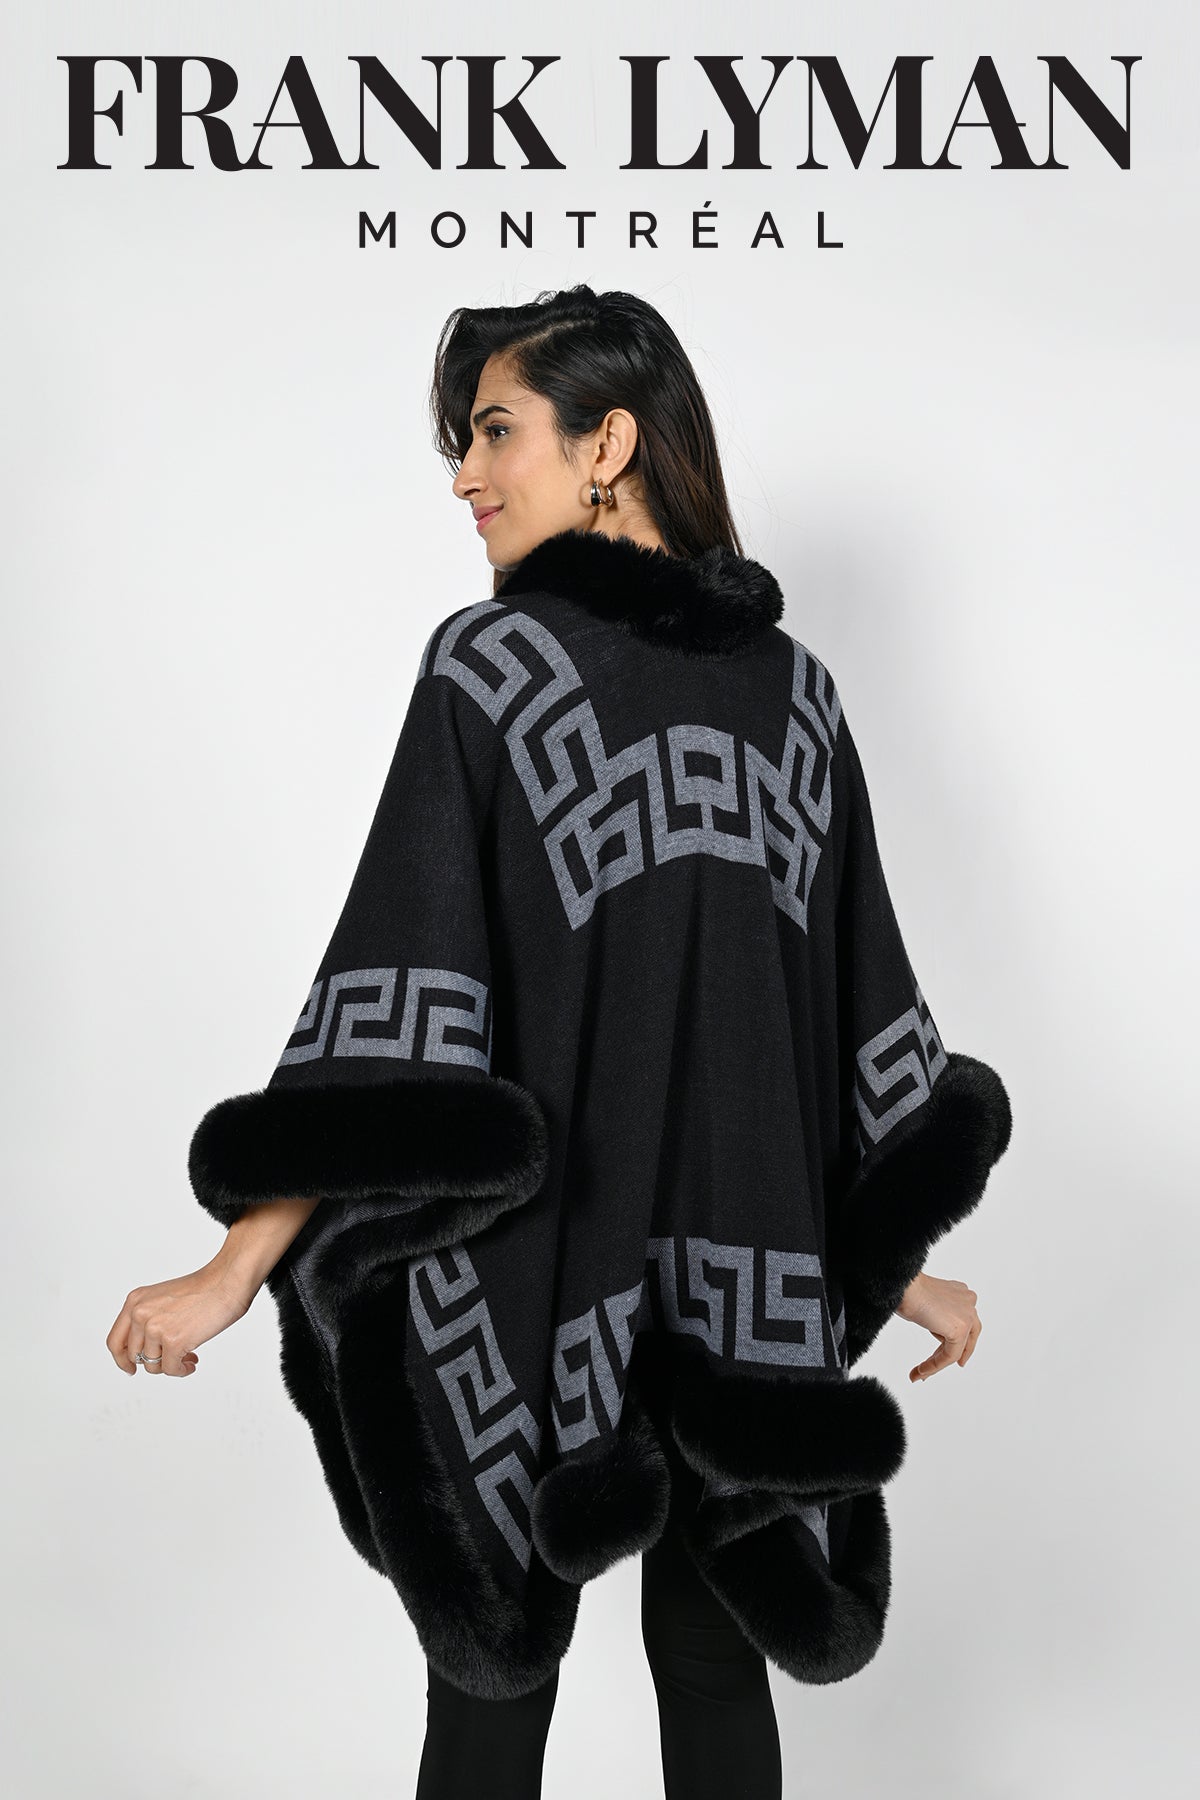 Frank Lyman Montreal Poncho Sweater-Frank Lyman Montreal Sweaters-Buy Frank Lyman Montreal Sweaters Online-Frank Lyman Montreal Online Shop-Frank Lyman Montreal Fall 2022 Collection